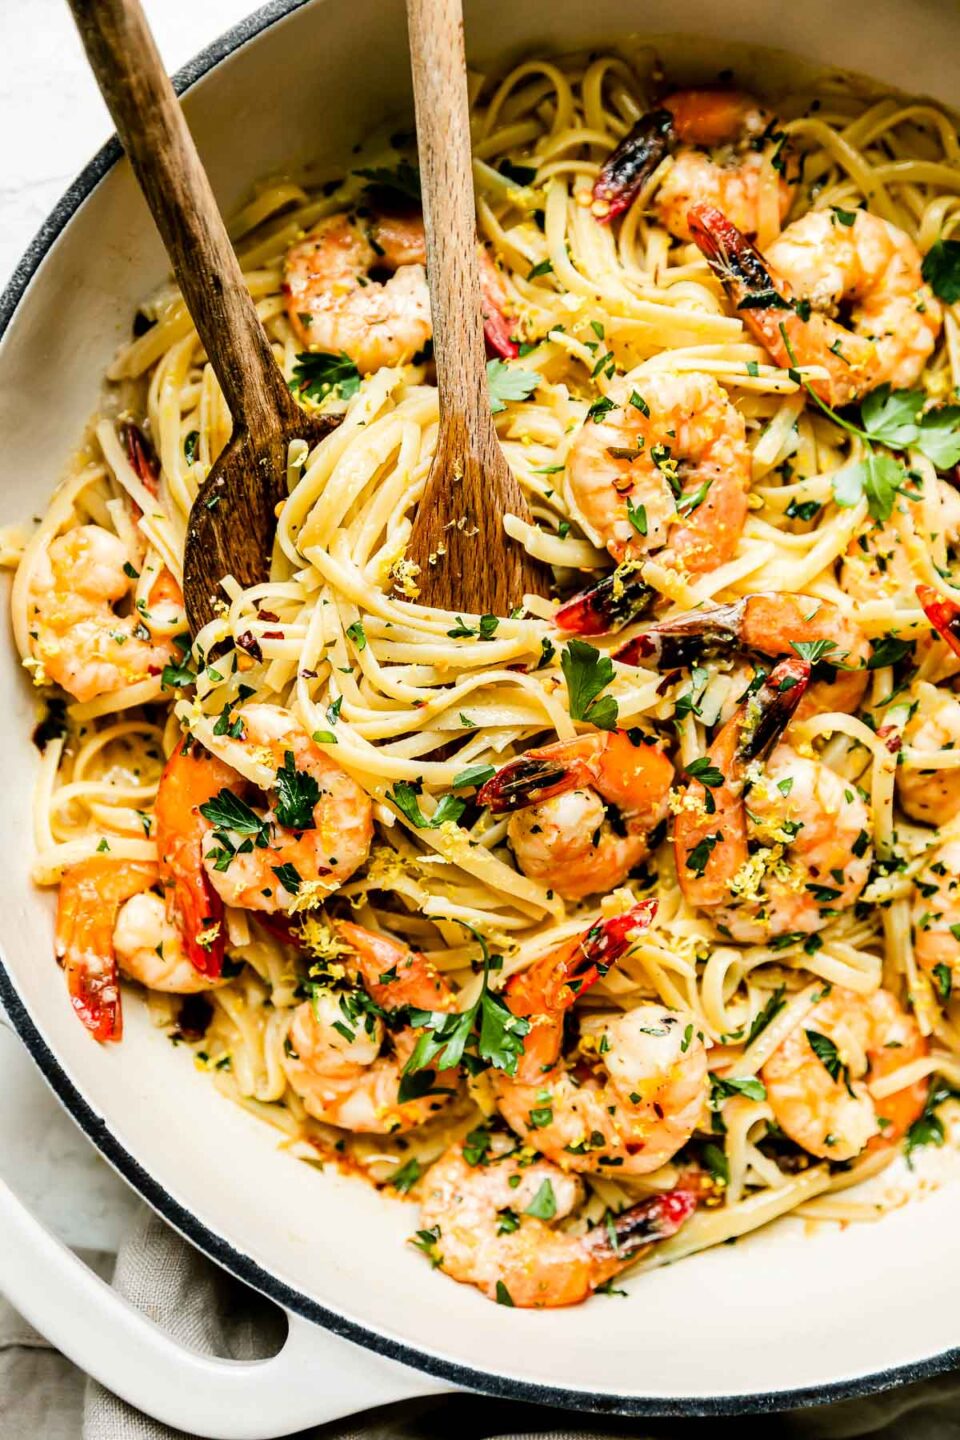 Baked shrimp scampi pasta fills a large double handle braising pan. The pan sits atop a creamy white textured surface. Two wooden serving spoons rest inside of the pan. A cream colored linen napkin rests underneath the pan.